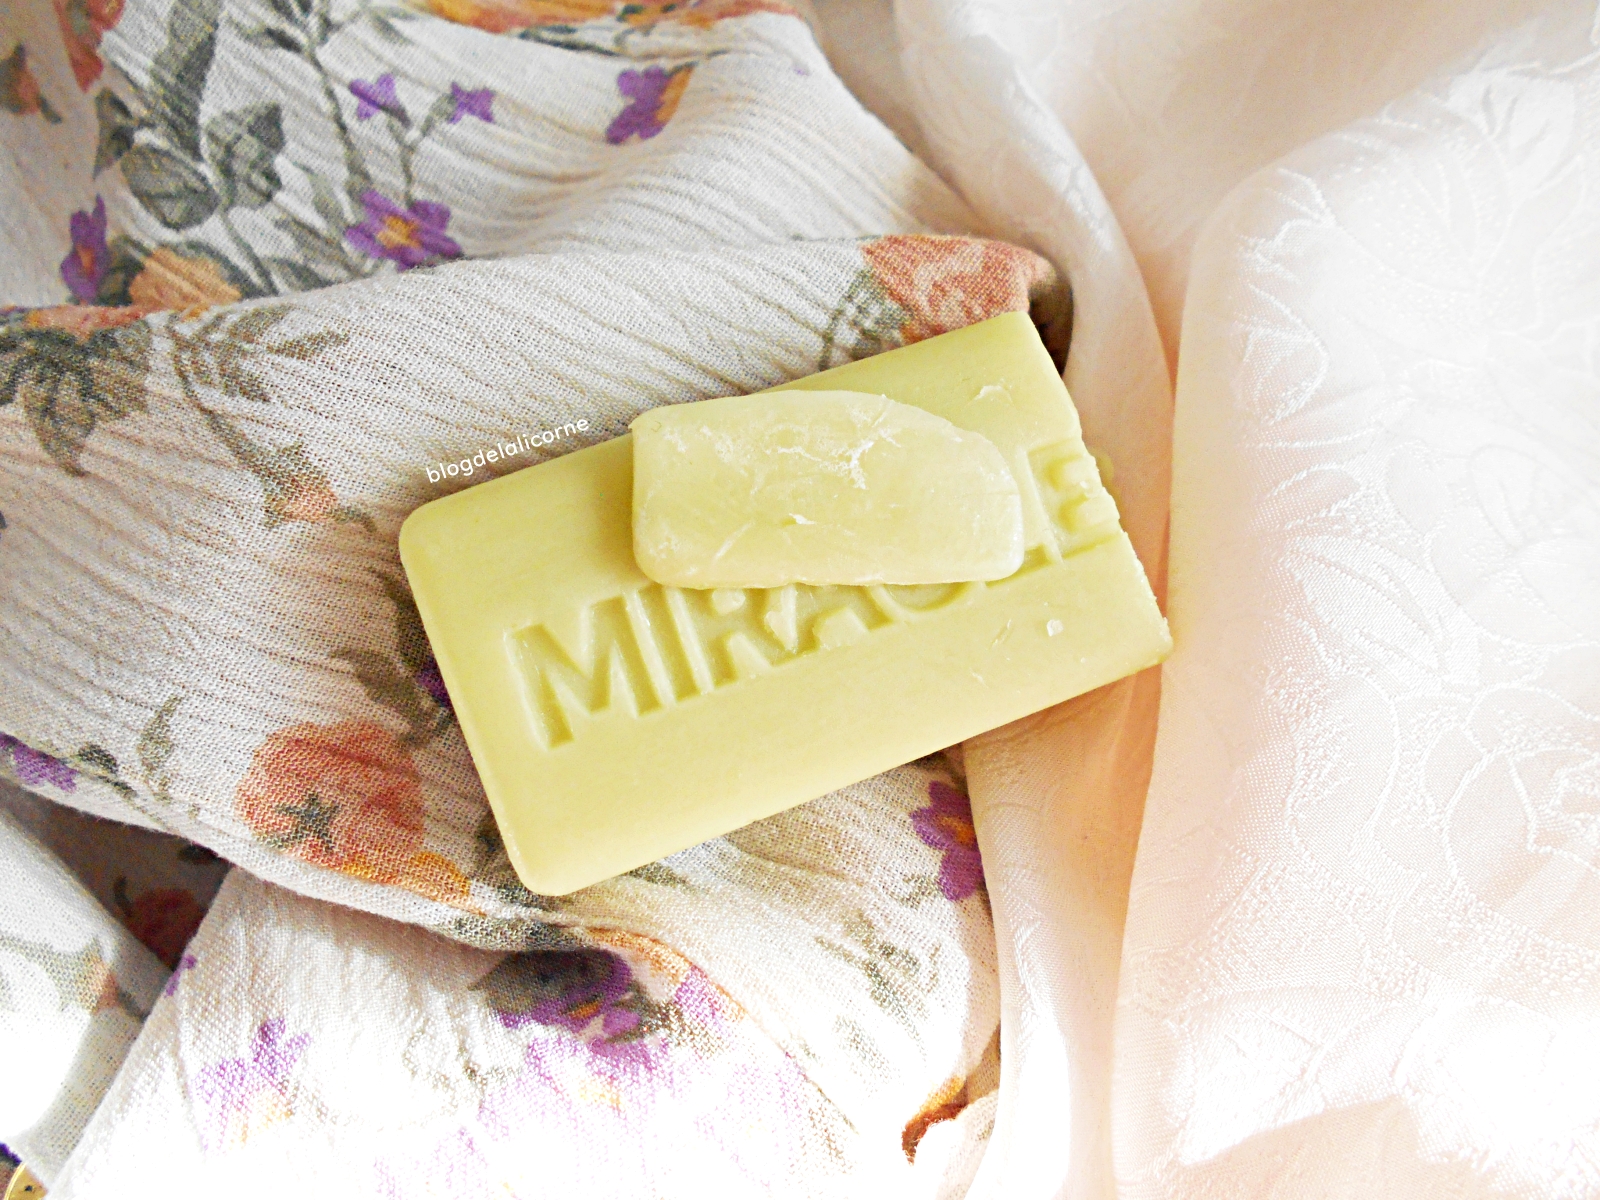 SOME BY MI - AHA, BHA, PHA 30 Days Miracle Cleansing Bar Review